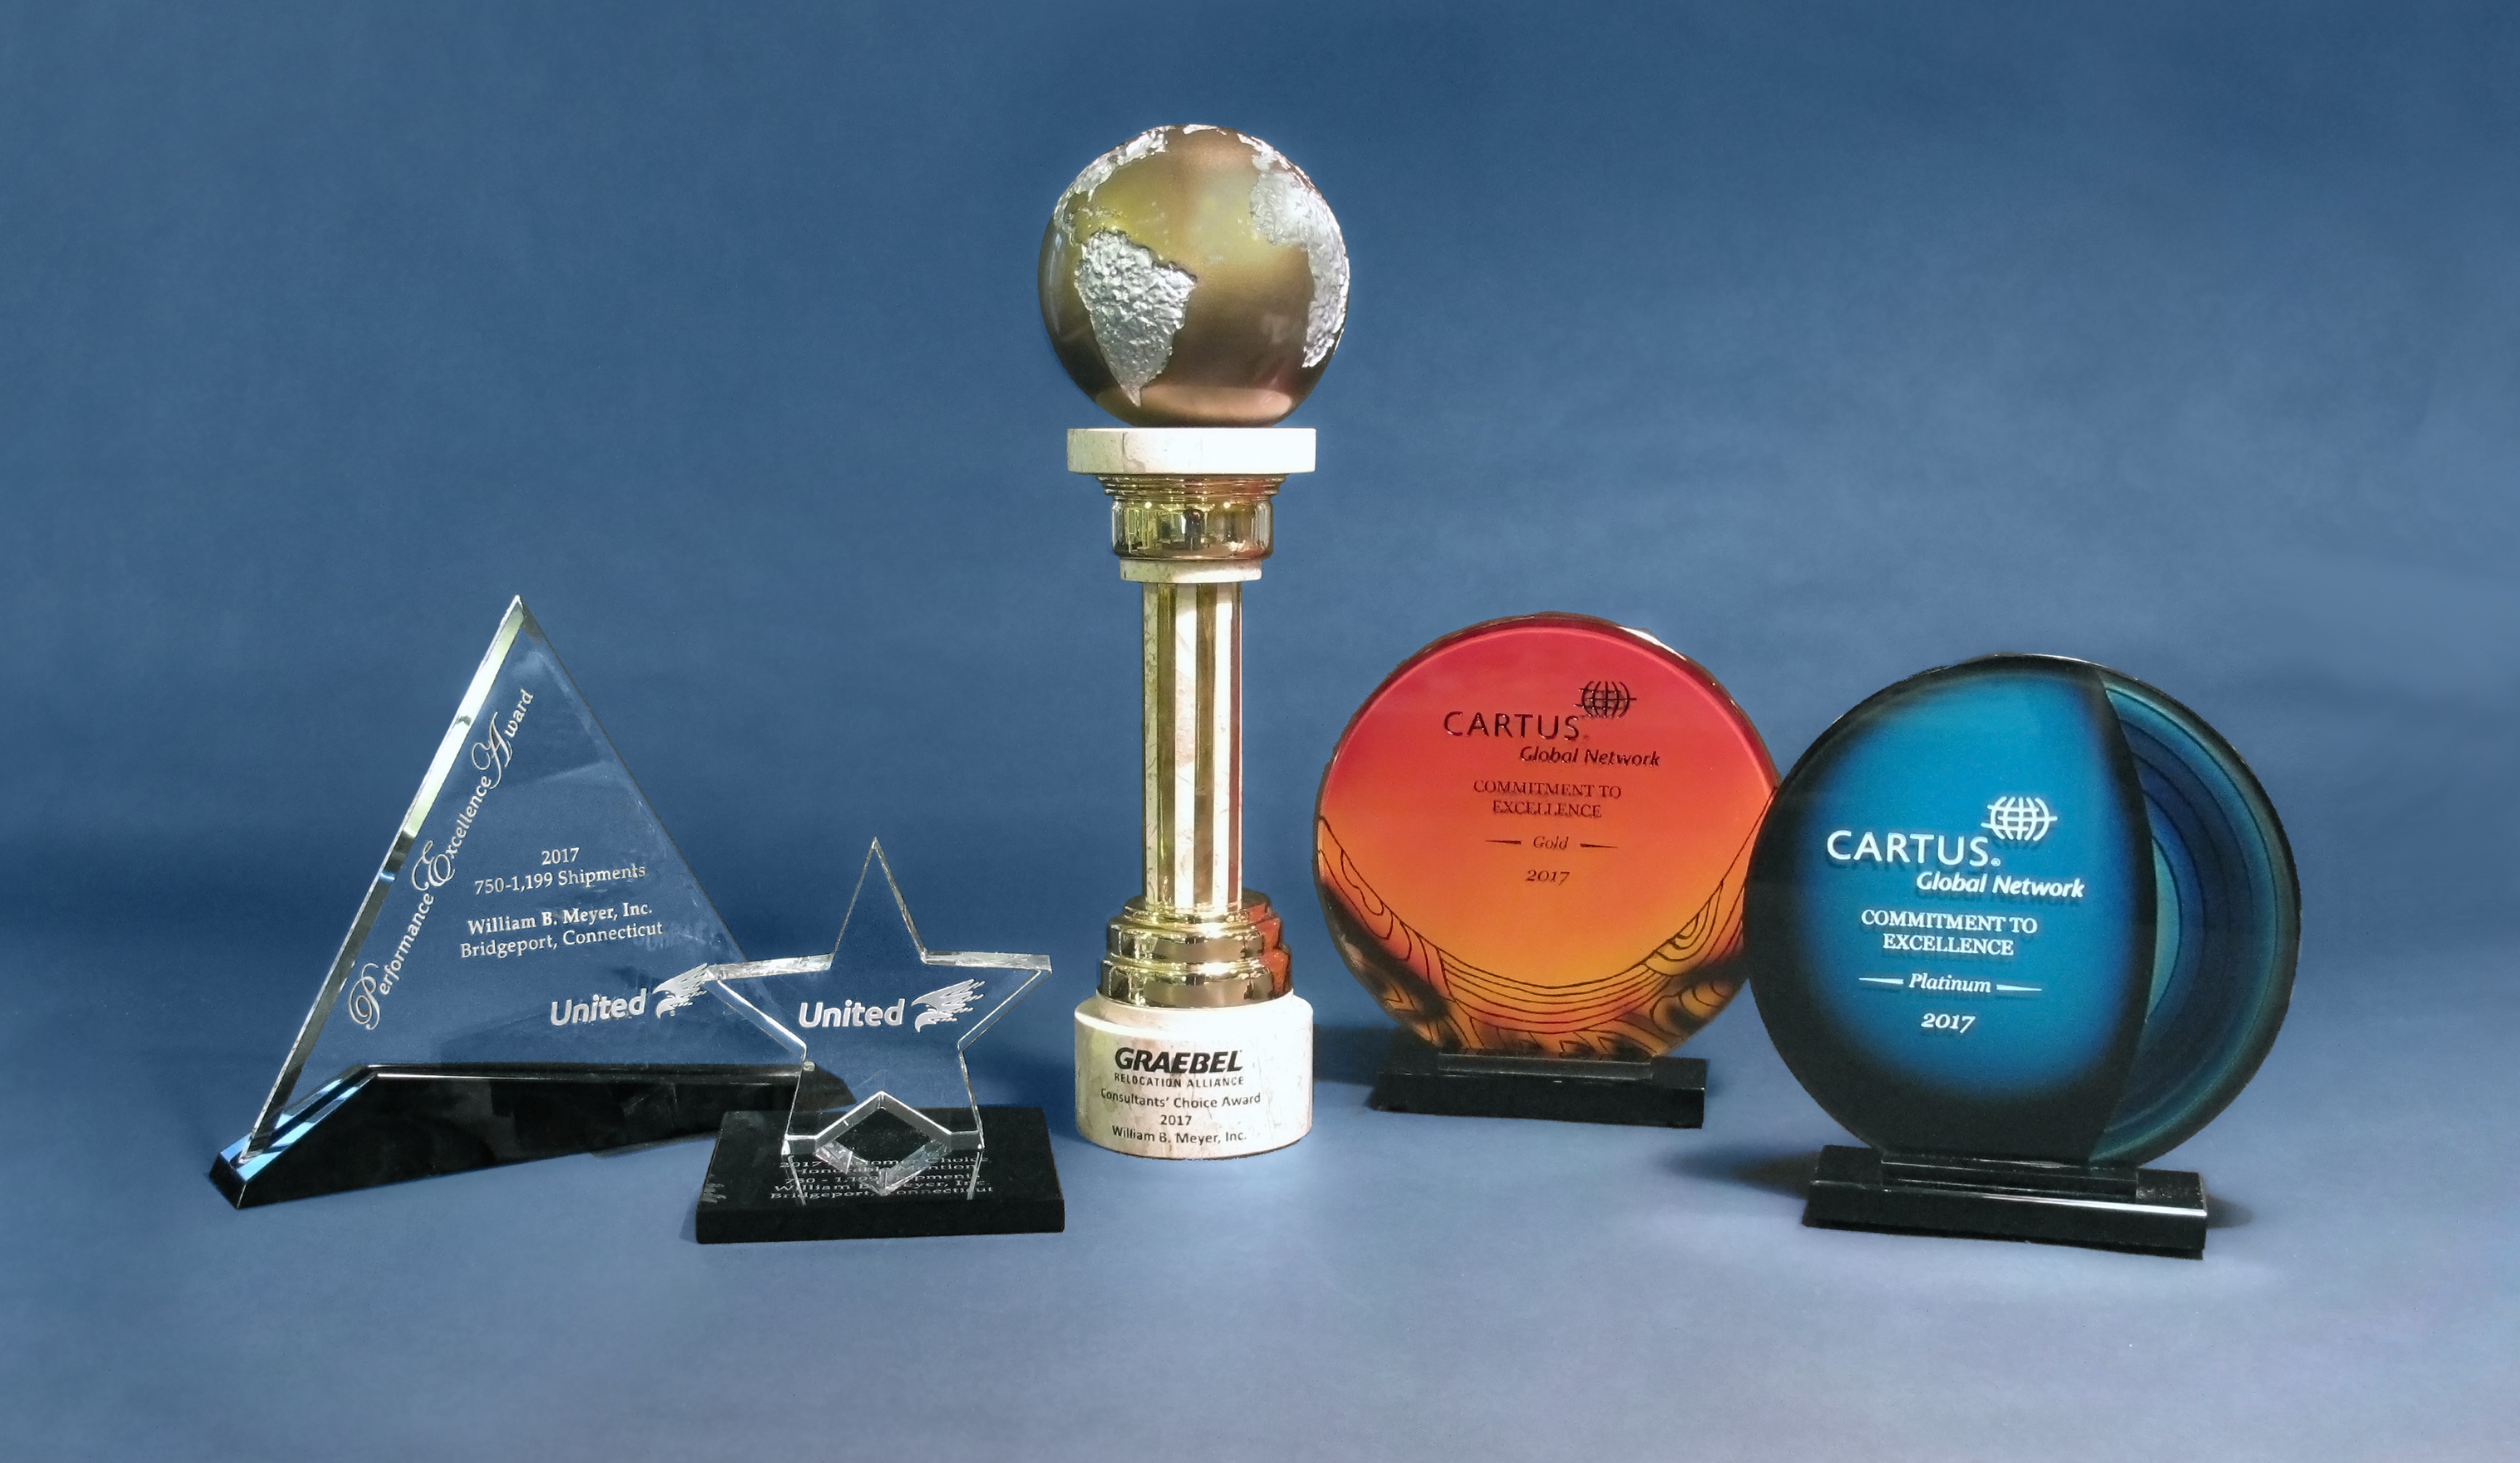 William B. Meyer, Inc. Achieves Awards from Industry Partners and Customers